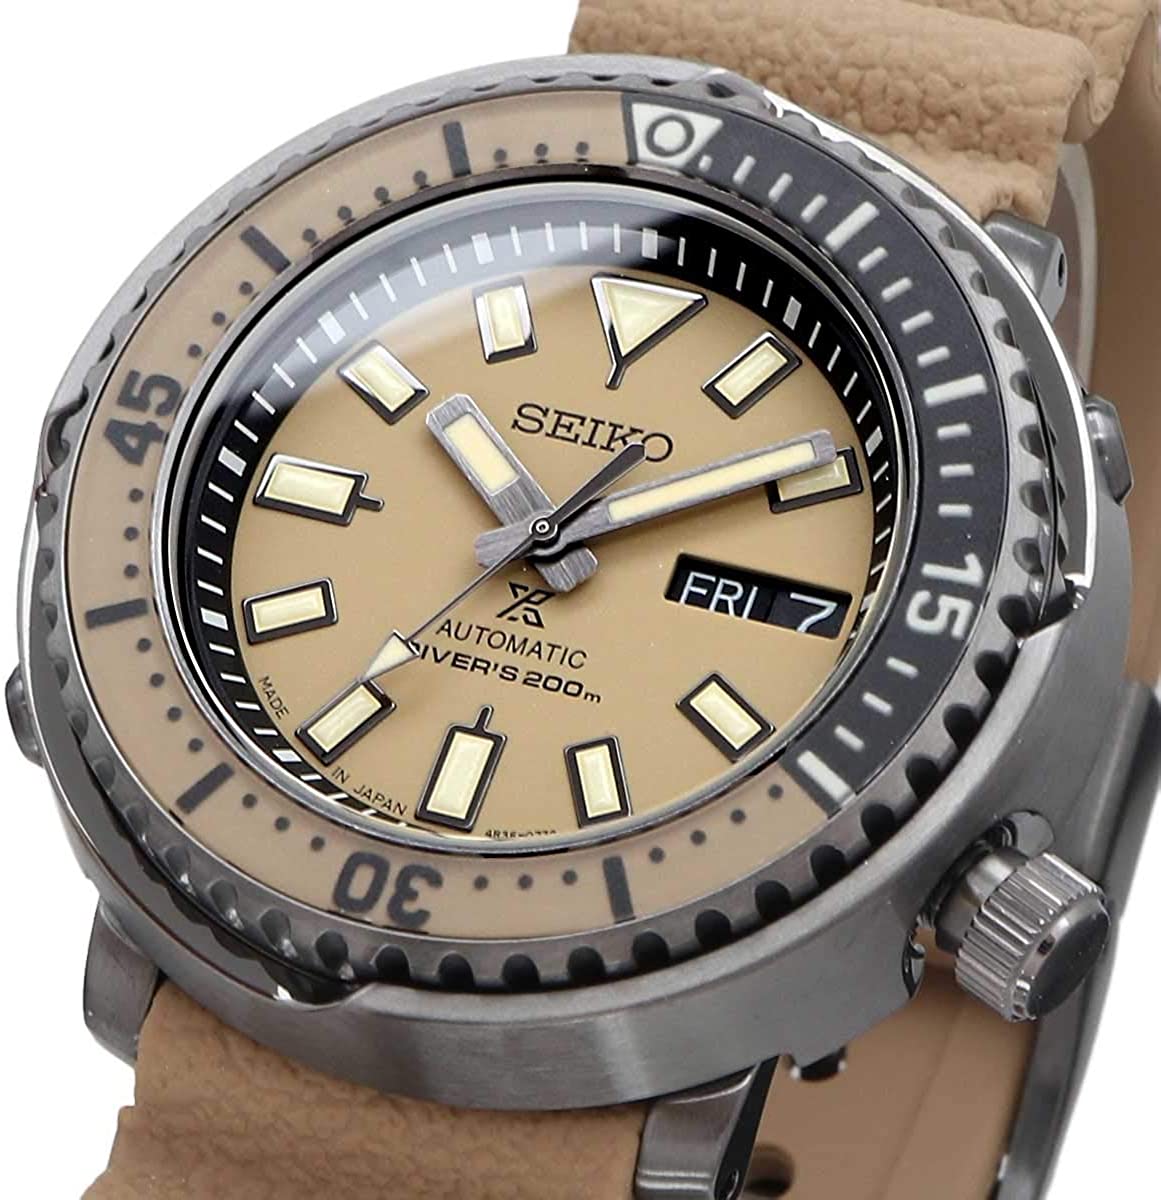 SEIKO PROSPEX Mechanical Automatic Winding Made in Japan Made in Japan  Diver s 200m SRPE29J1 Tuna Can Beige Men's Overseas Model - Discovery Japan  Mall